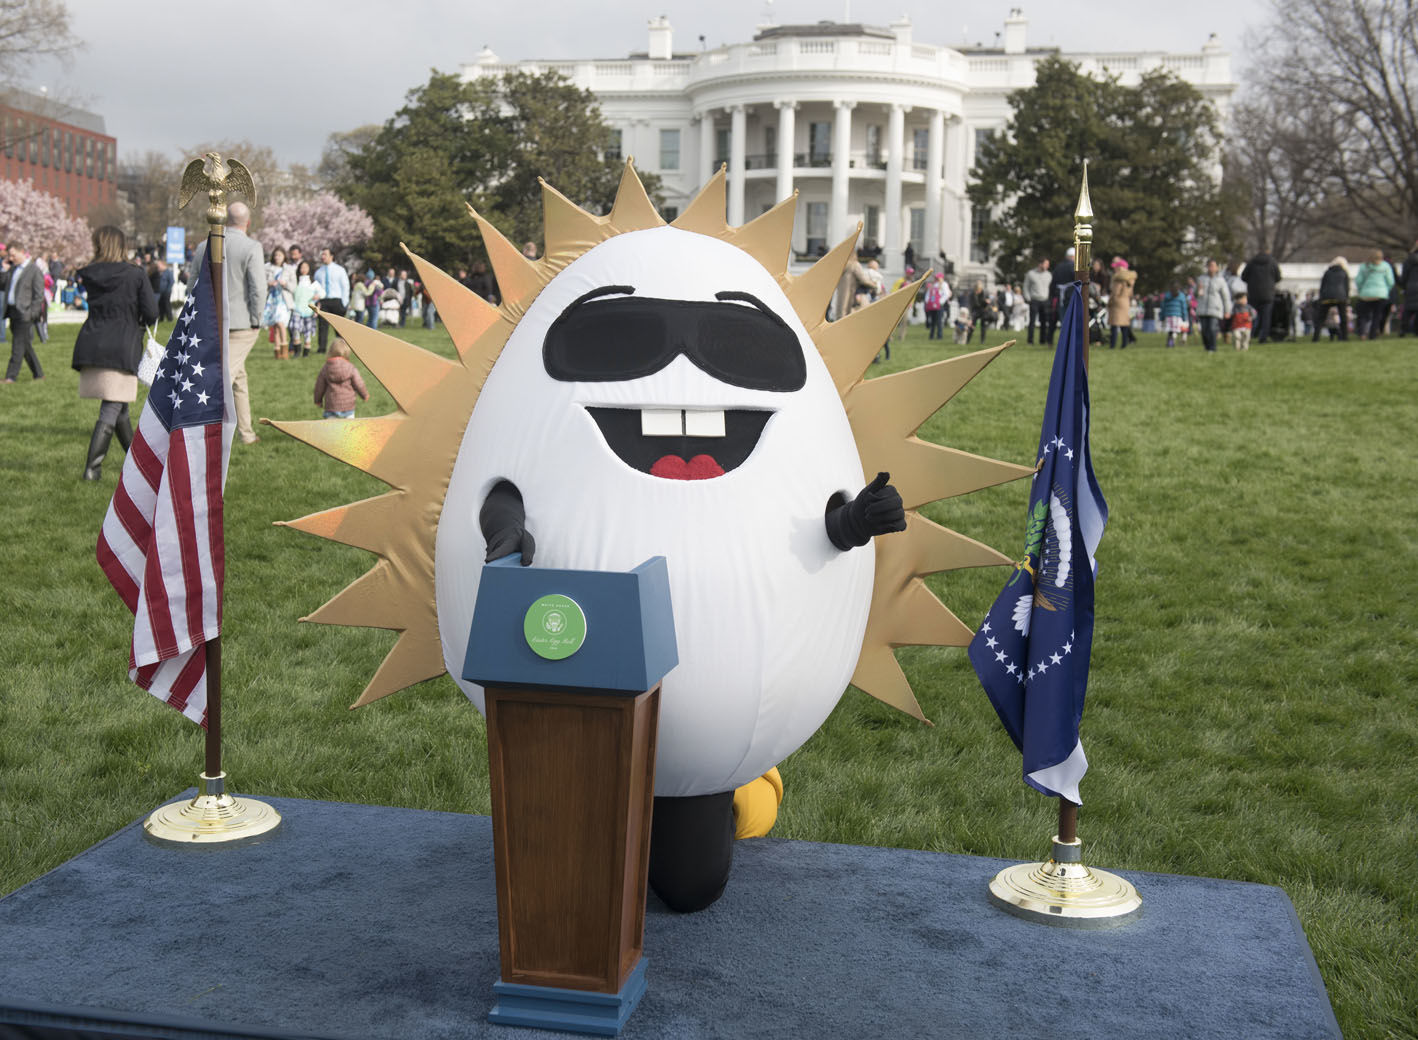 IMAGE DISTRIBUTED FOR AMERICAN EGG BOARD - The Incredible Egg mascot Eggy poses at a podium on the South Lawn at the 2018 White House Easter Egg Roll on Monday, April 2, 2018, in Washington. More than 30,000 eggs were provided by America's egg farmers for rolling, dyeing and sampling at the event, supported by American Egg Board. (Kevin Wolf/AP Images for American Egg Board)